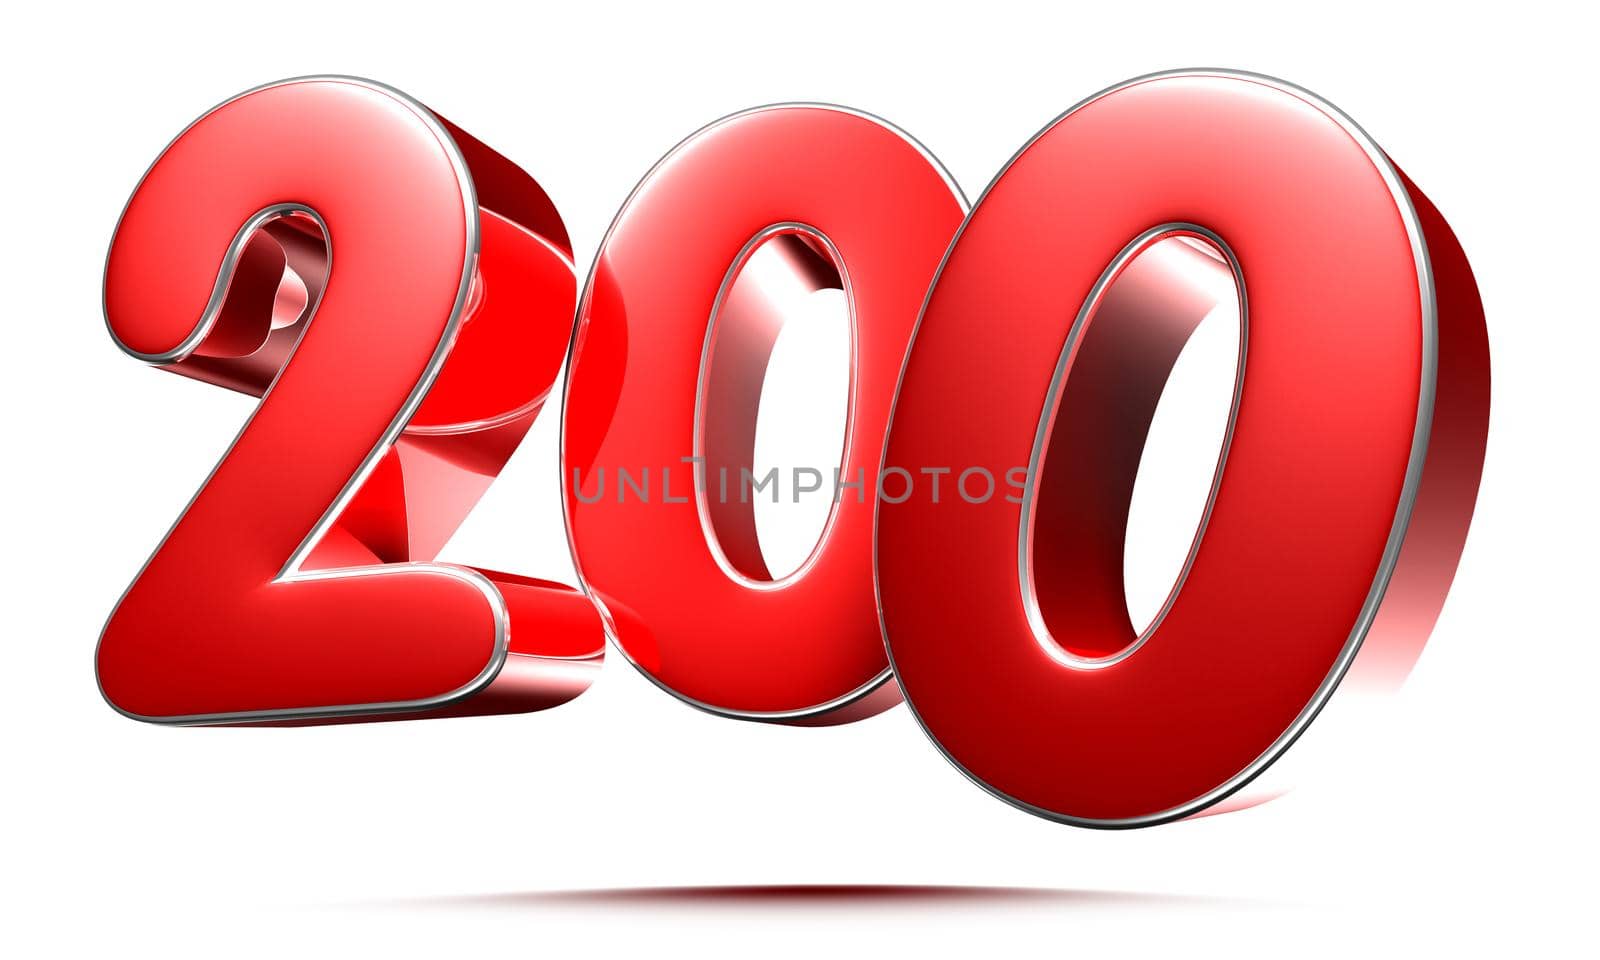 Rounded red numbers 200 on white background 3D illustration with clipping path